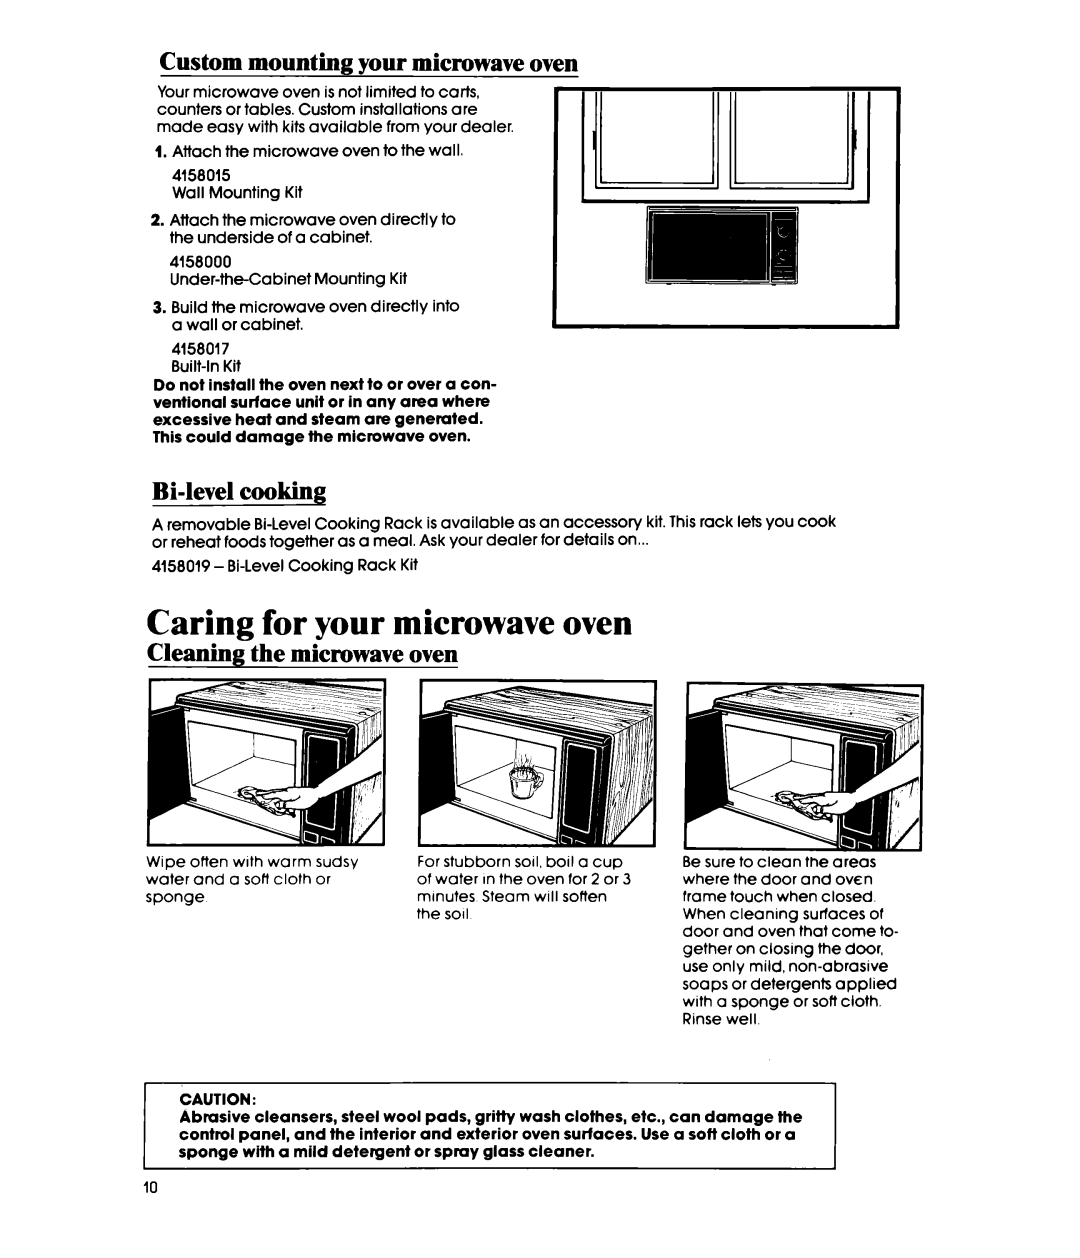 Whirlpool MW32OOXS manual Caring for your microwave oven, Custom mounting your microwave oven, Bi-levelcooking 